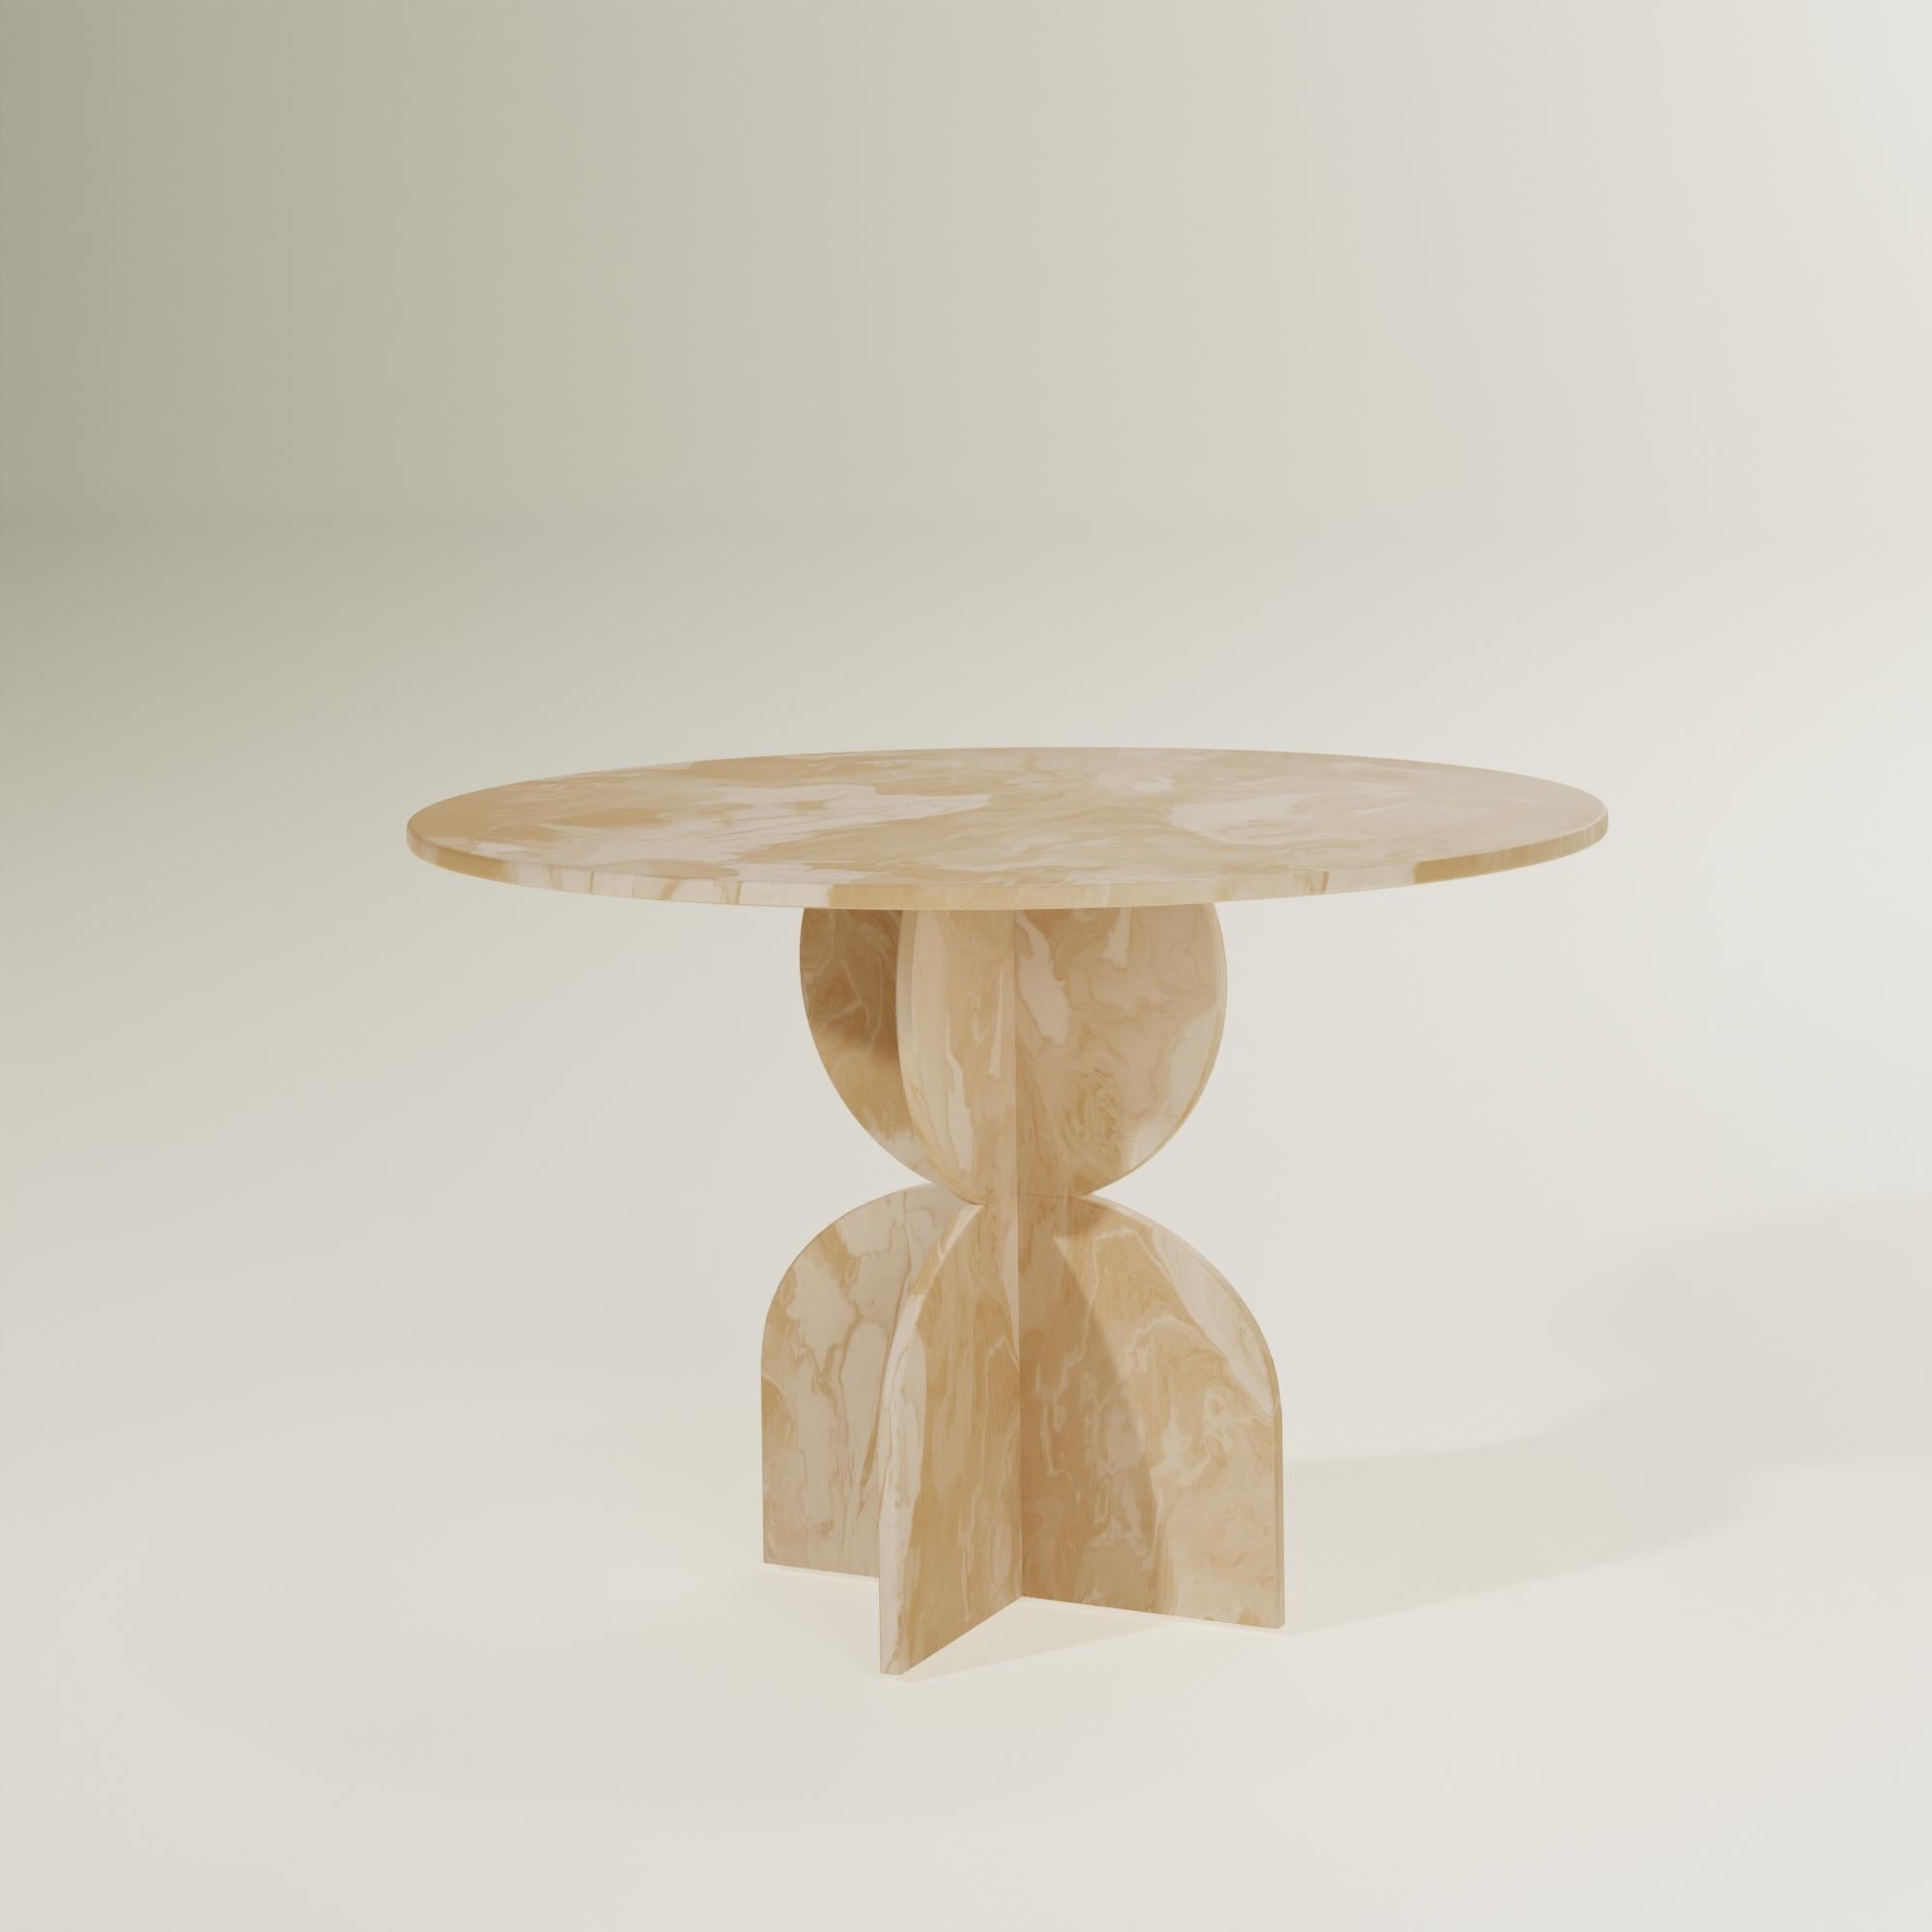 Contemporary Iced Coffee Brown Round Table Hand-Crafted 100% Recycled Plastic by Anqa Studios
Incredible conversations happen around incredible tables. ANQA Studios round table is a geometrically shaped table with a design inspired by the brutalist